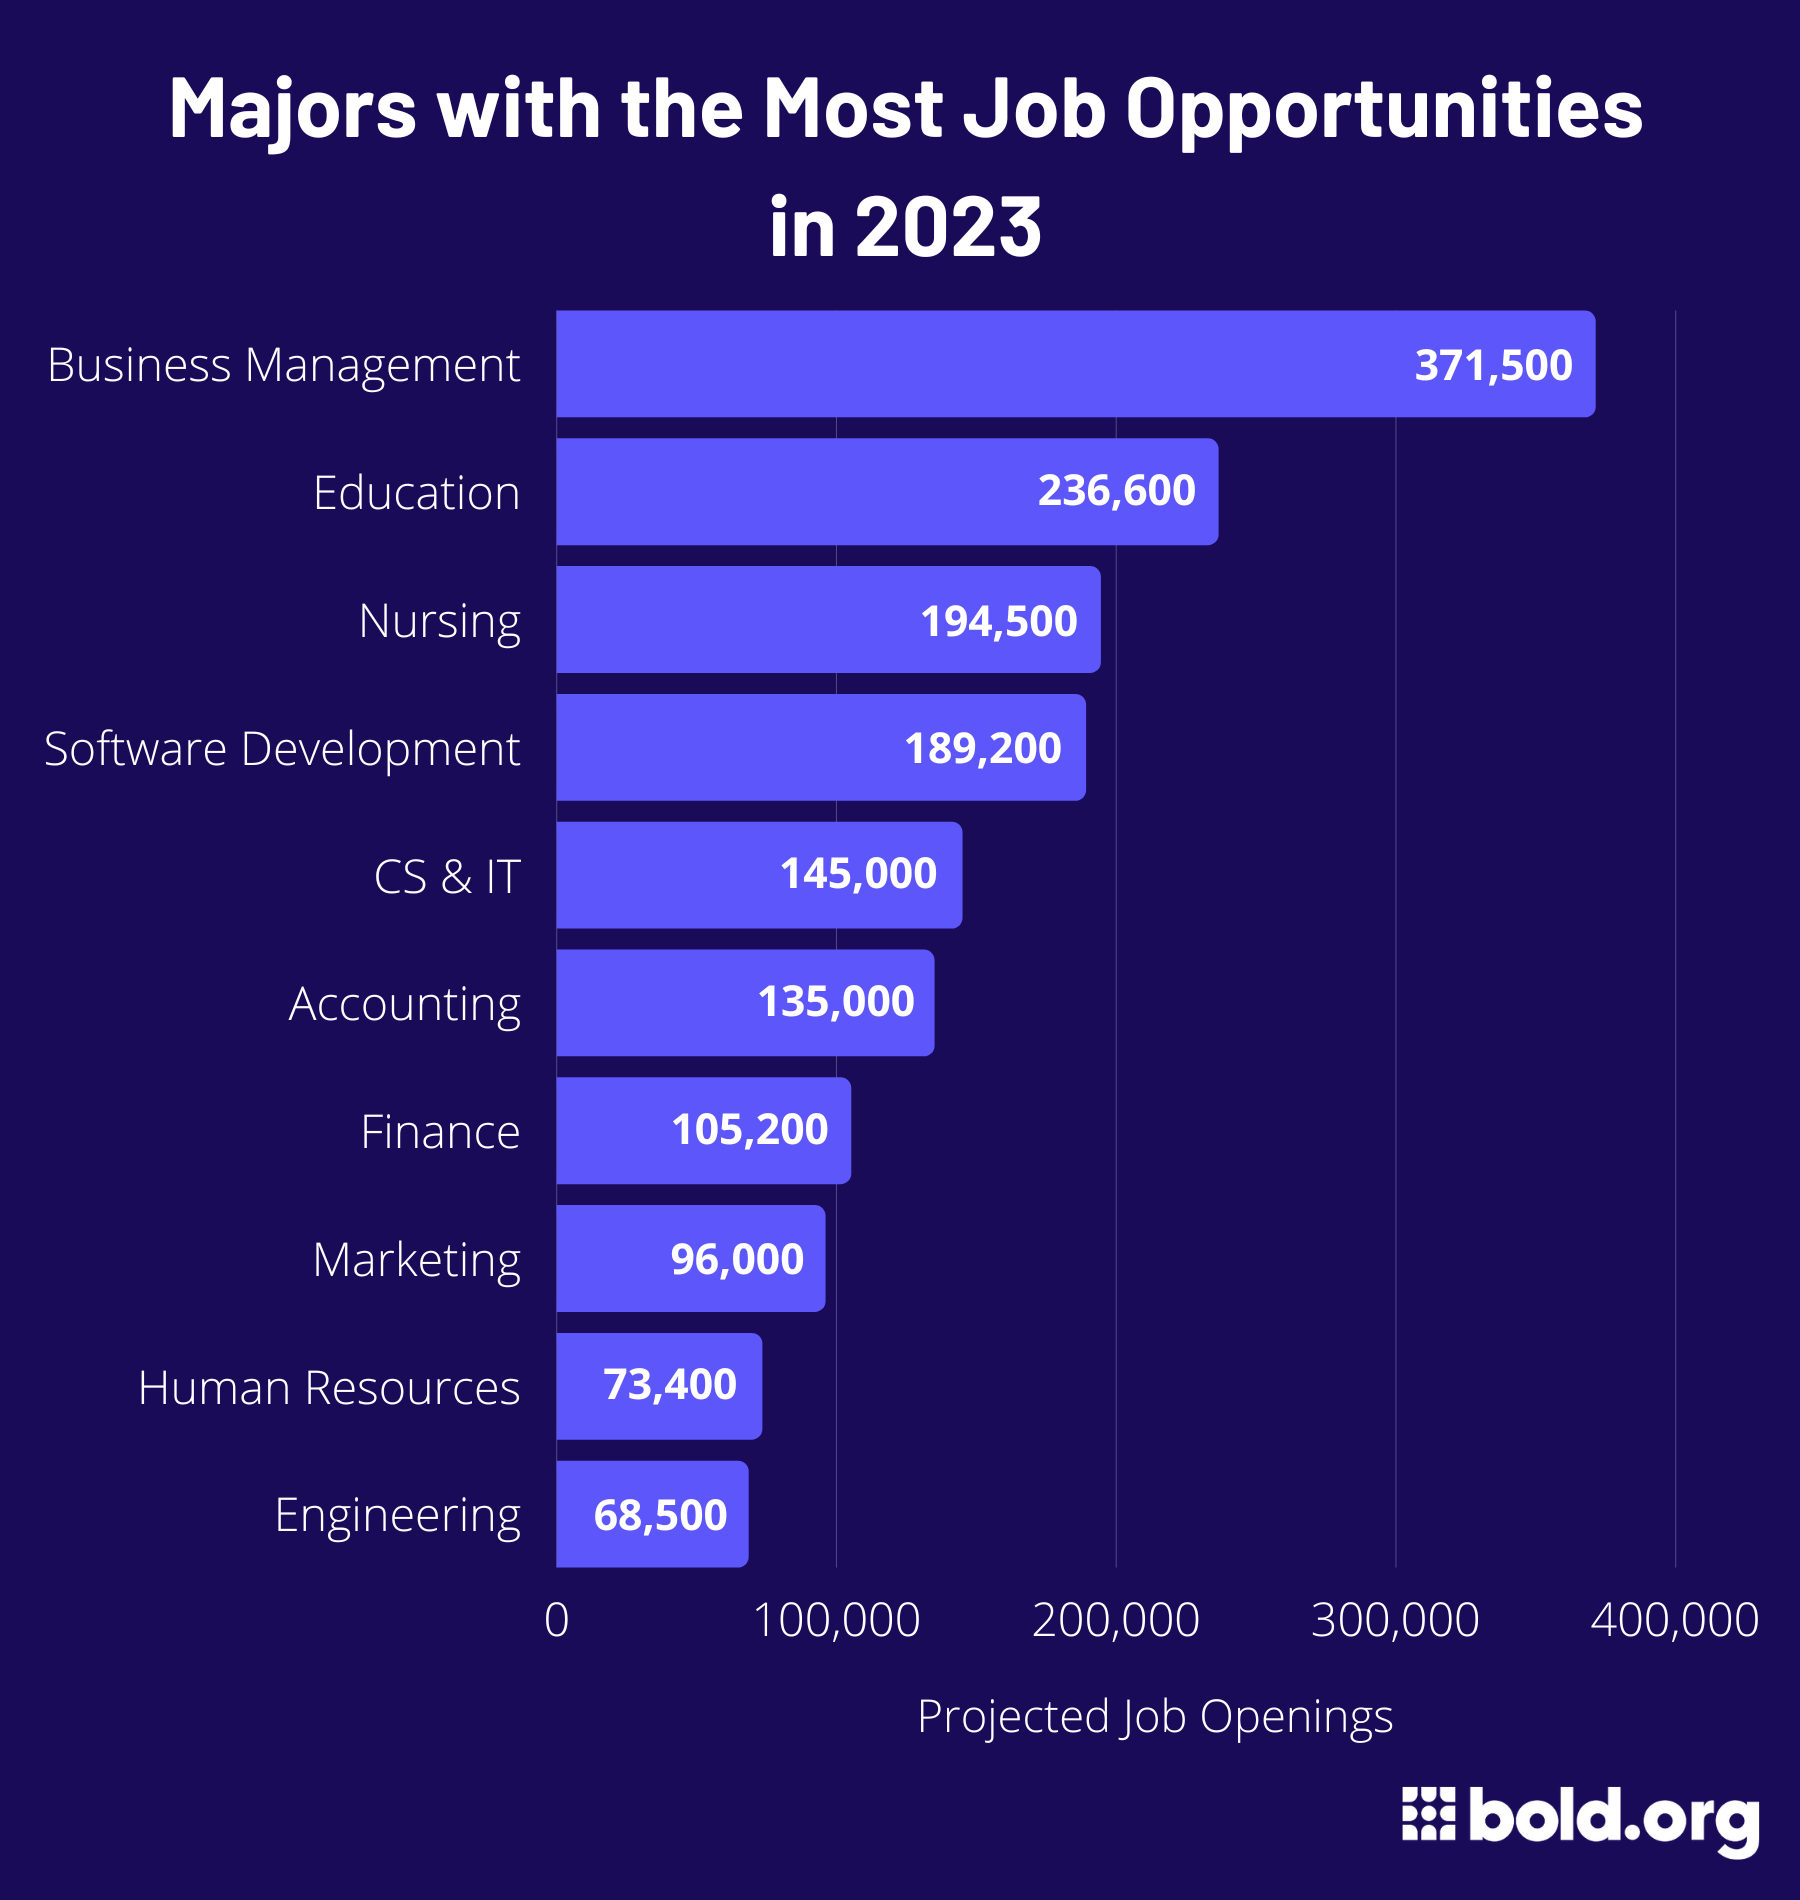 Bar chart showing the majors with the most job opportunities in 2023 (business management, education, nursing, software development, CS & IT, accounting, finance, marketing, human resources, and engineering)